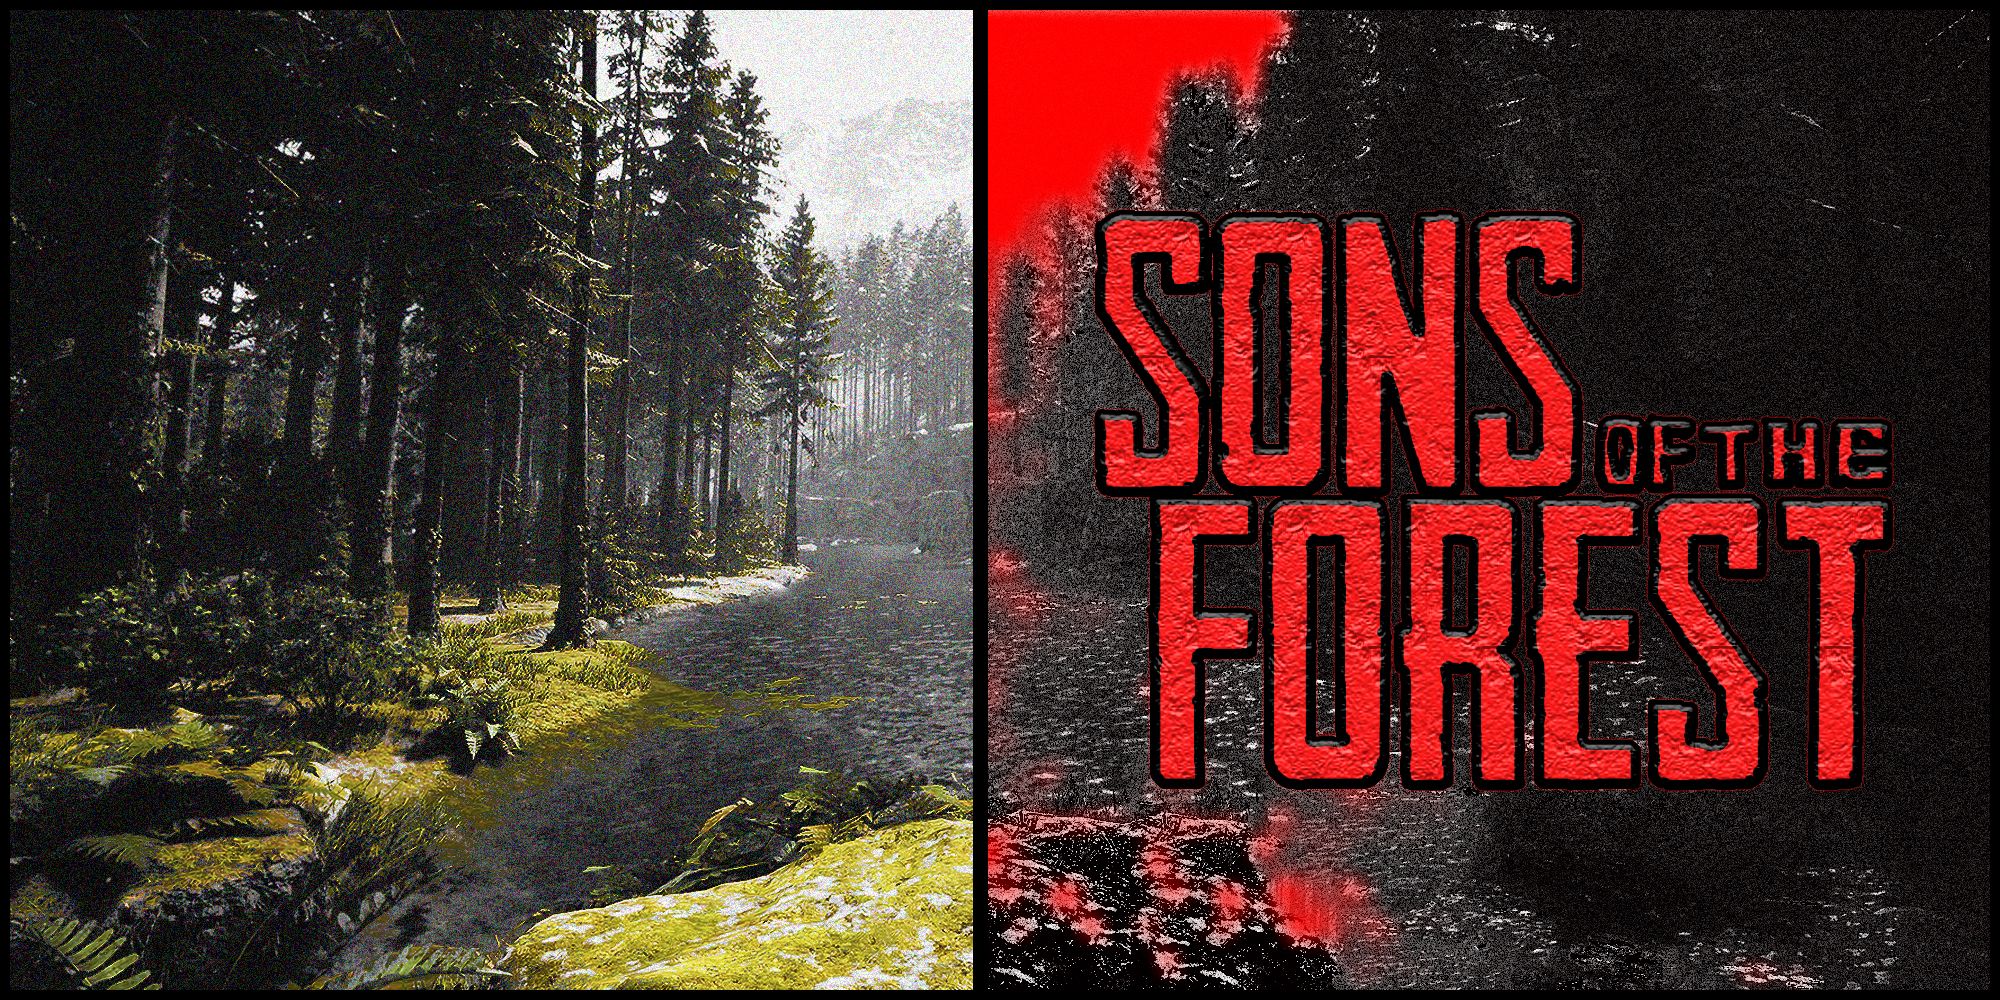 How to Hotkey items in Sons of the Forest